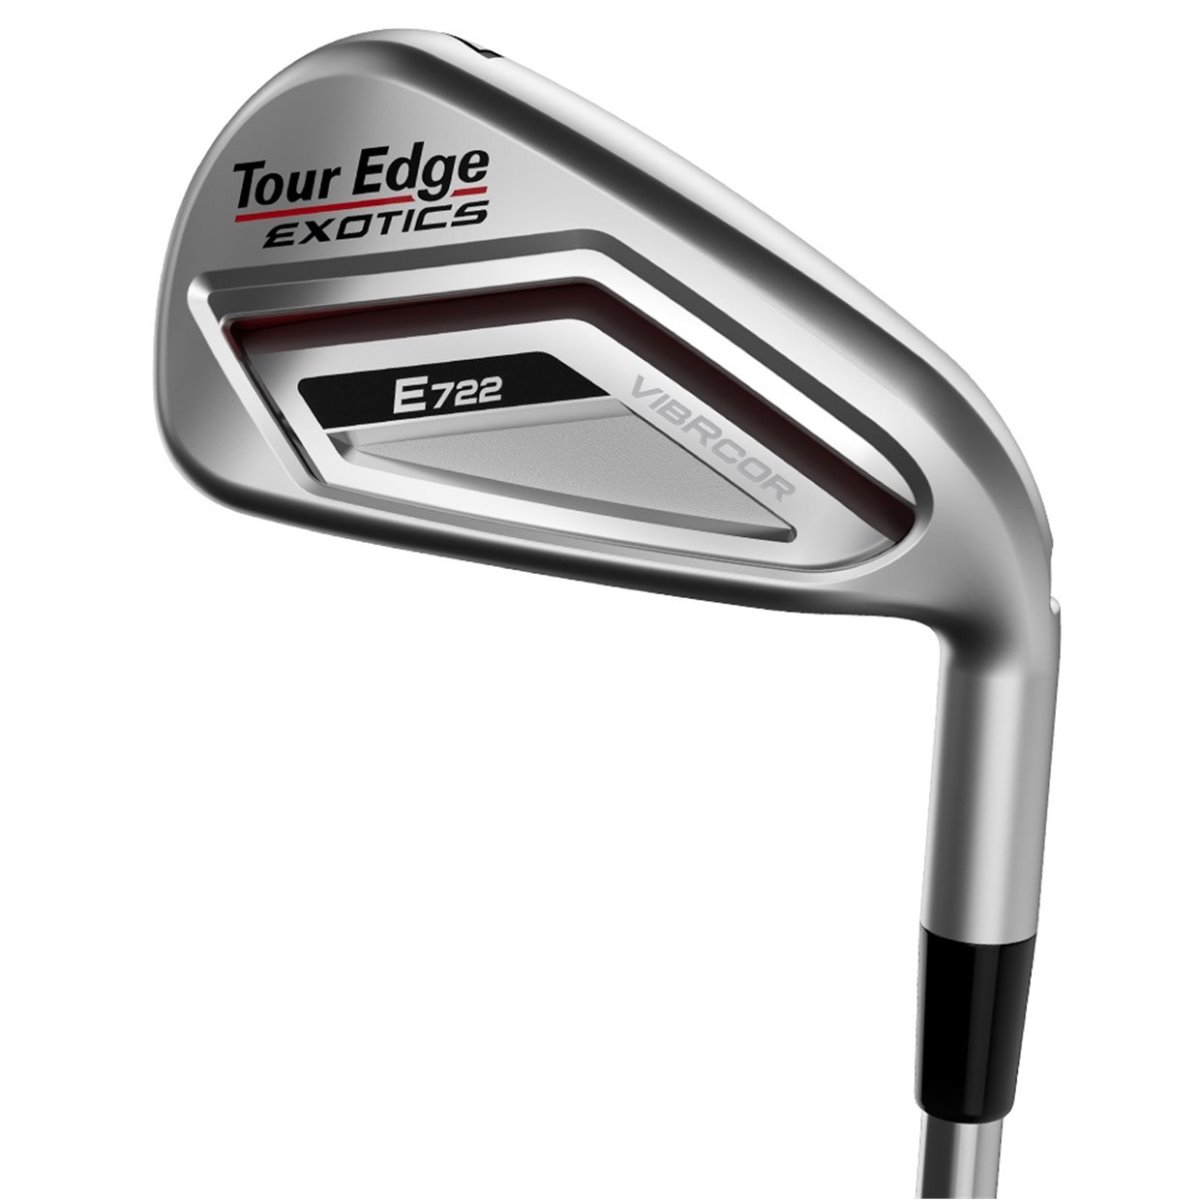 Shop Tour Edge Exotics E722 irons on Morning Read's online pro shop, powered by GlobalGolf.